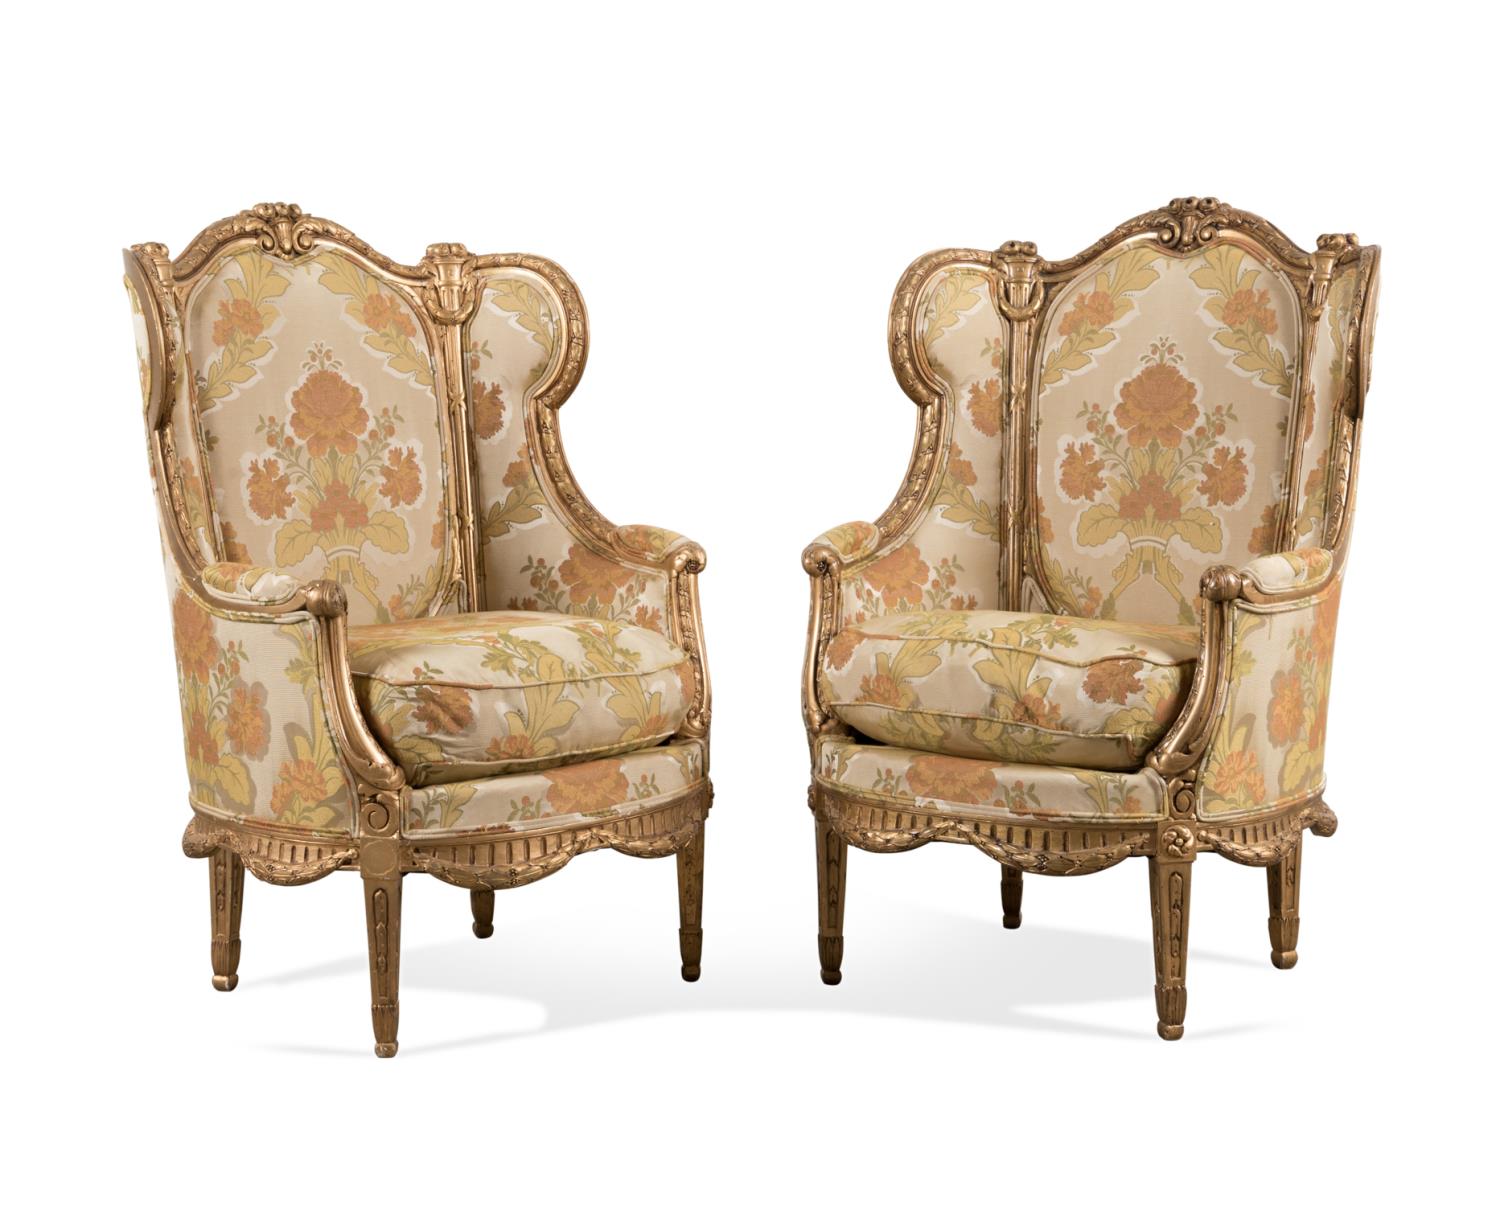 PAIR LOUIS XVI STYLE GILDED CONFESSIONAL 2f9909